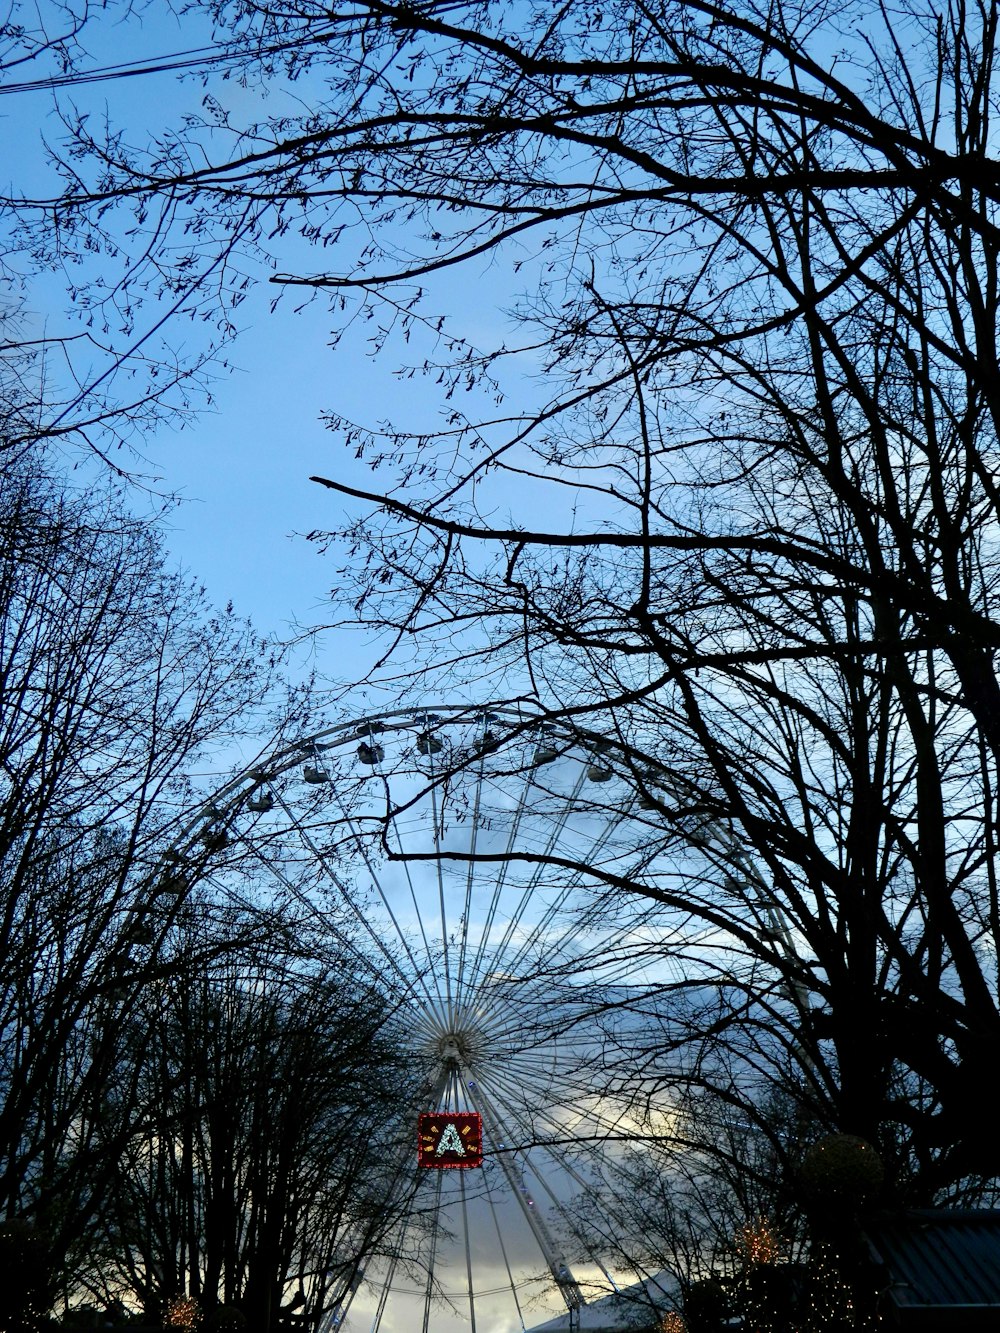 a ferris wheel surrounded by trees and a blue sky